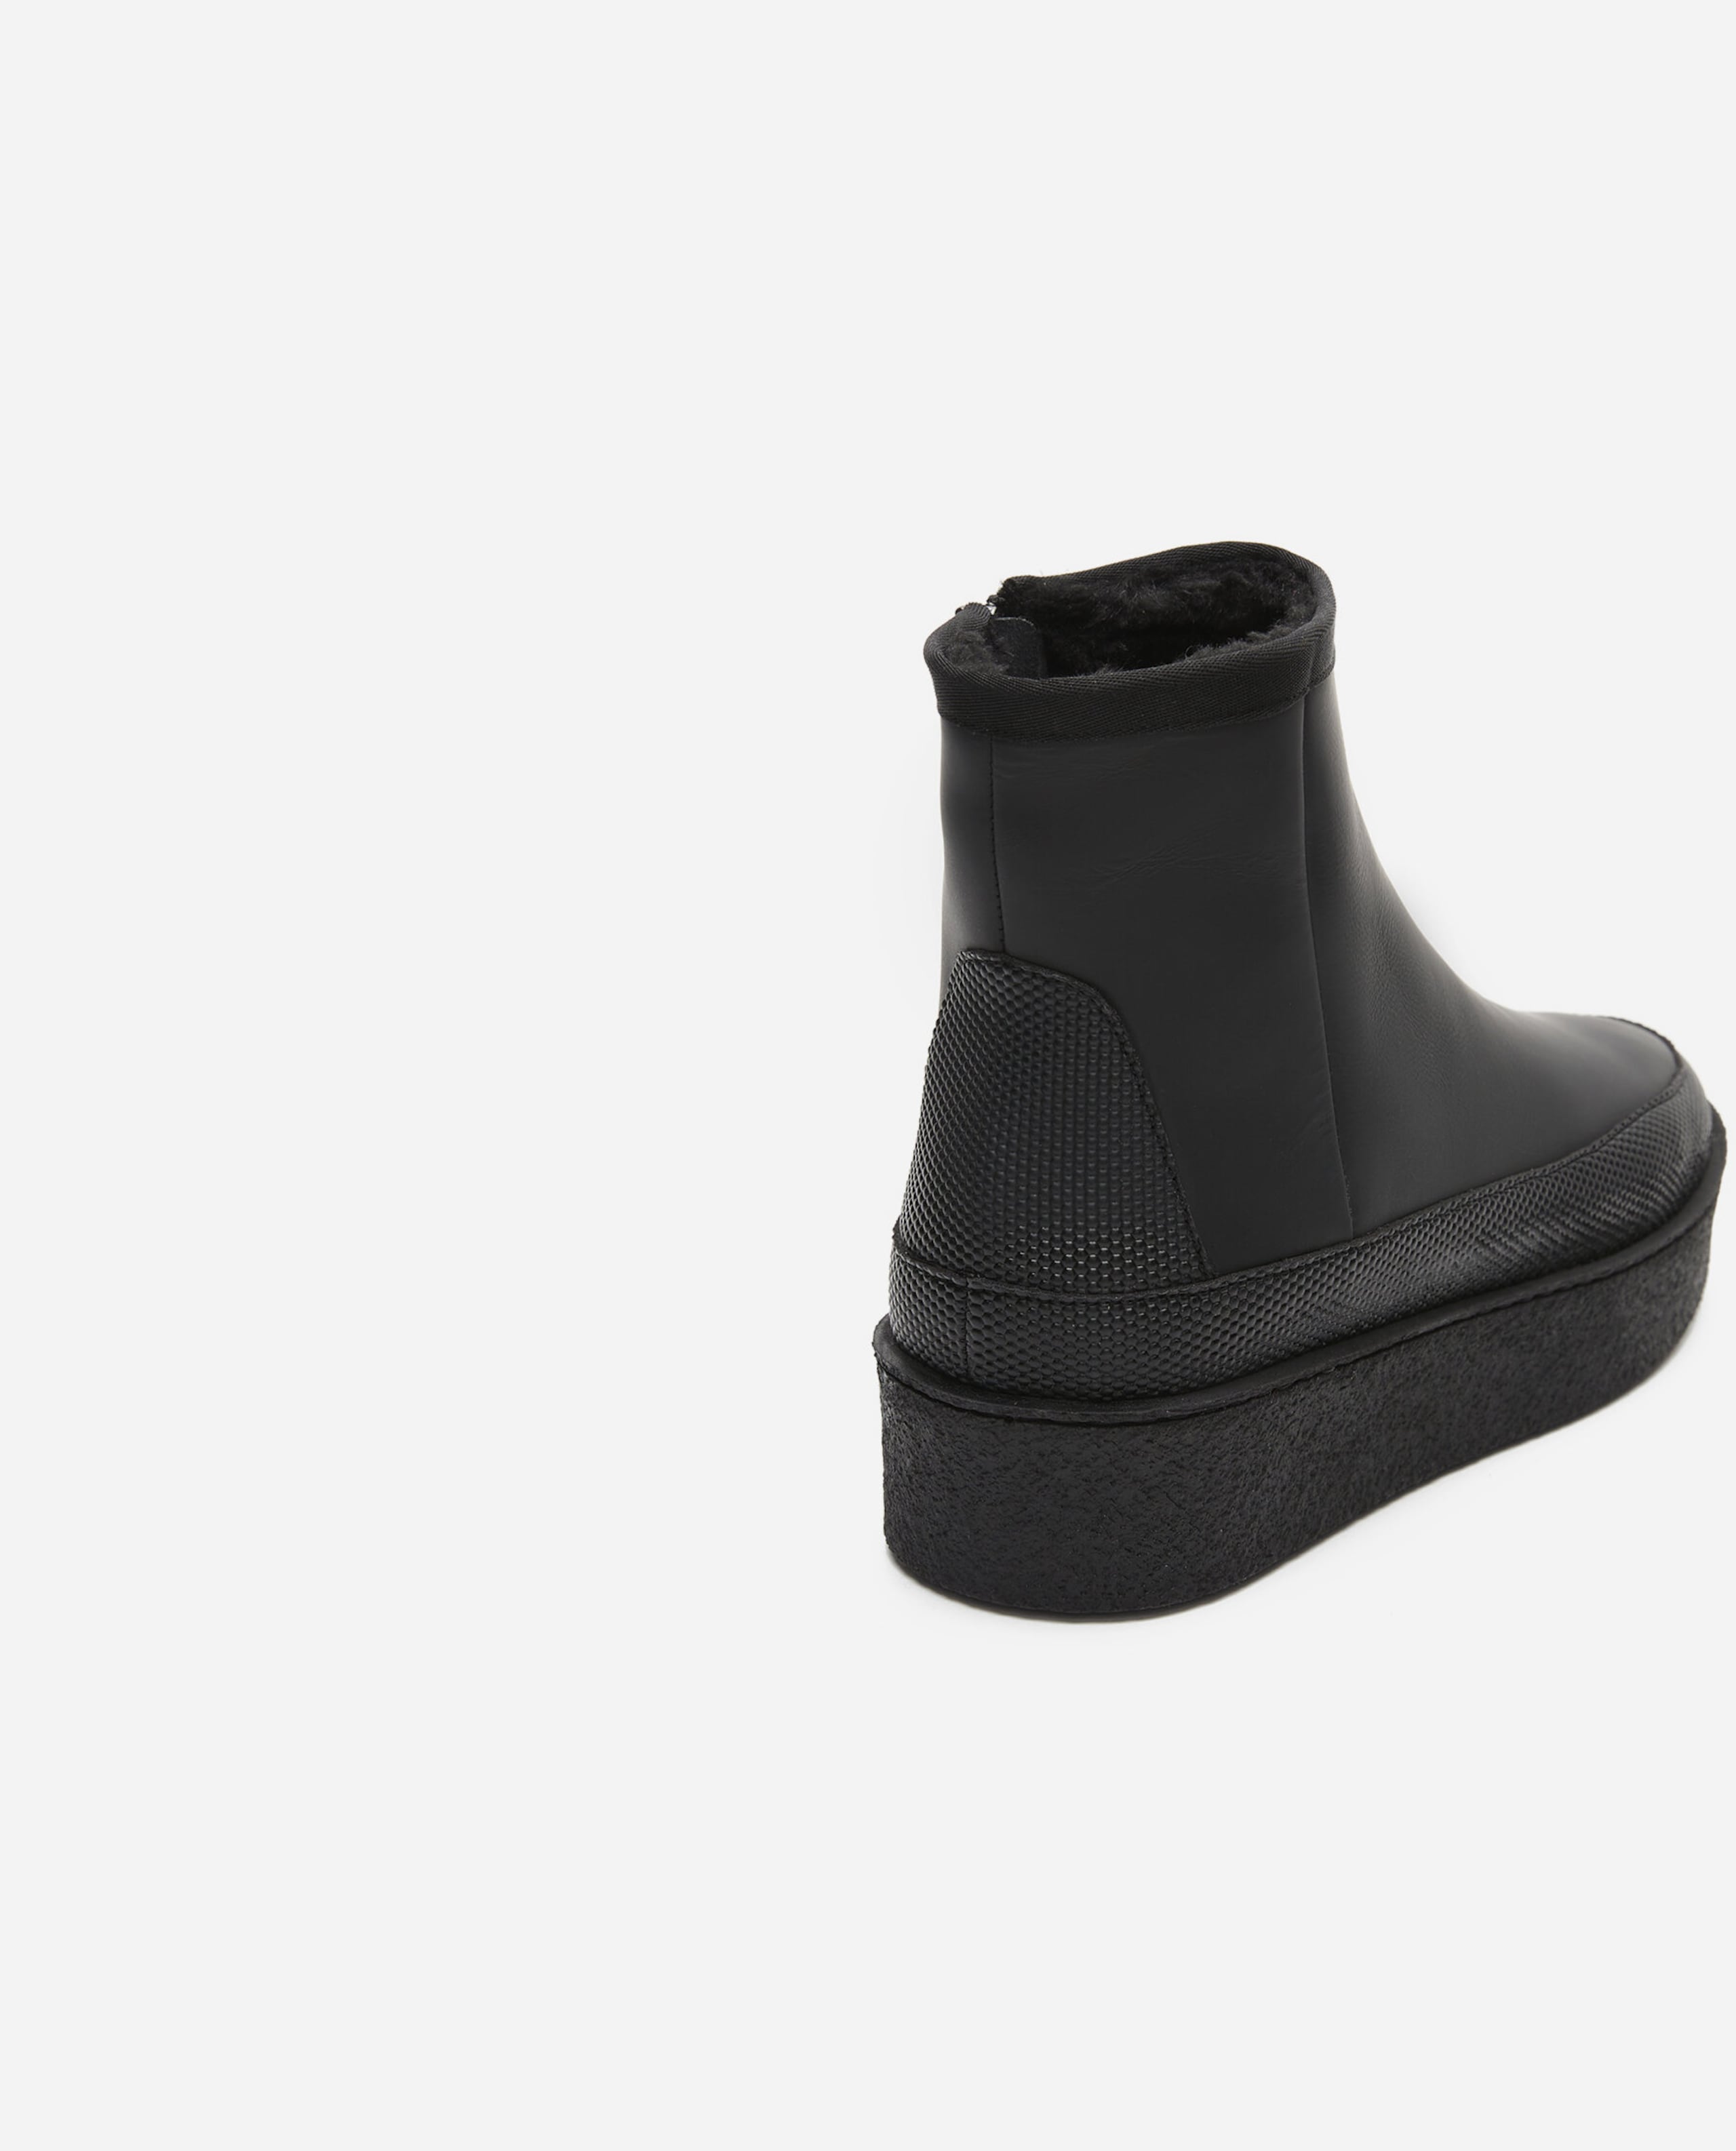 Aria Coated Leather Black Chelsea Boots 1020919126-014 - 06